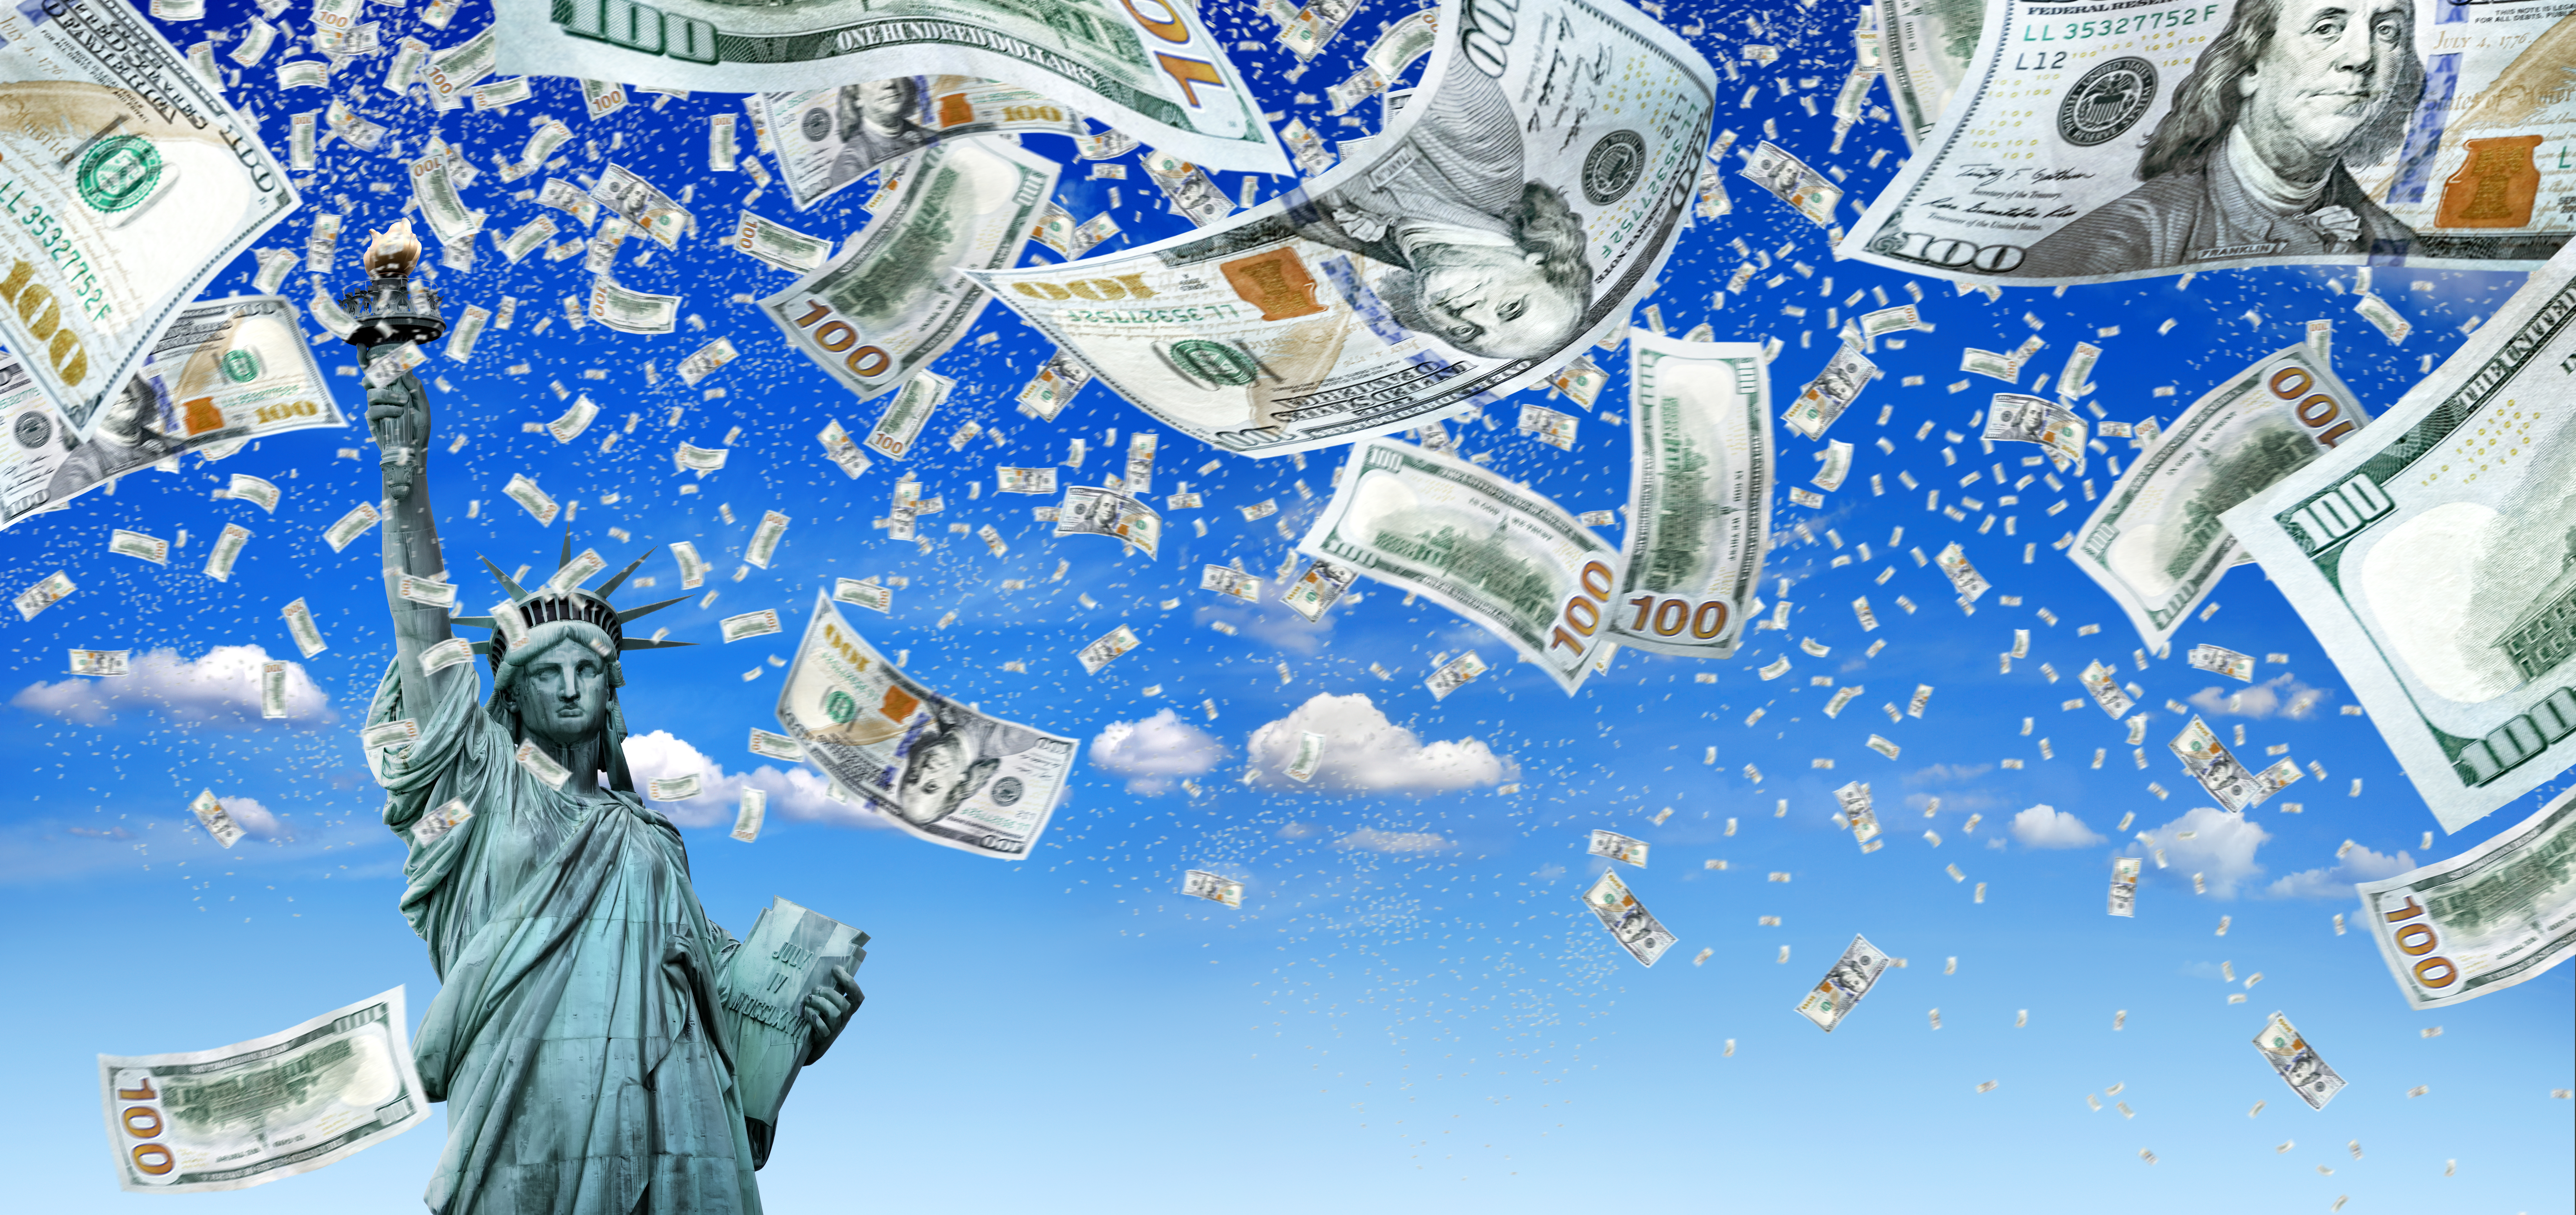 Statue of liberty under a sky of floating 100 dollar bills